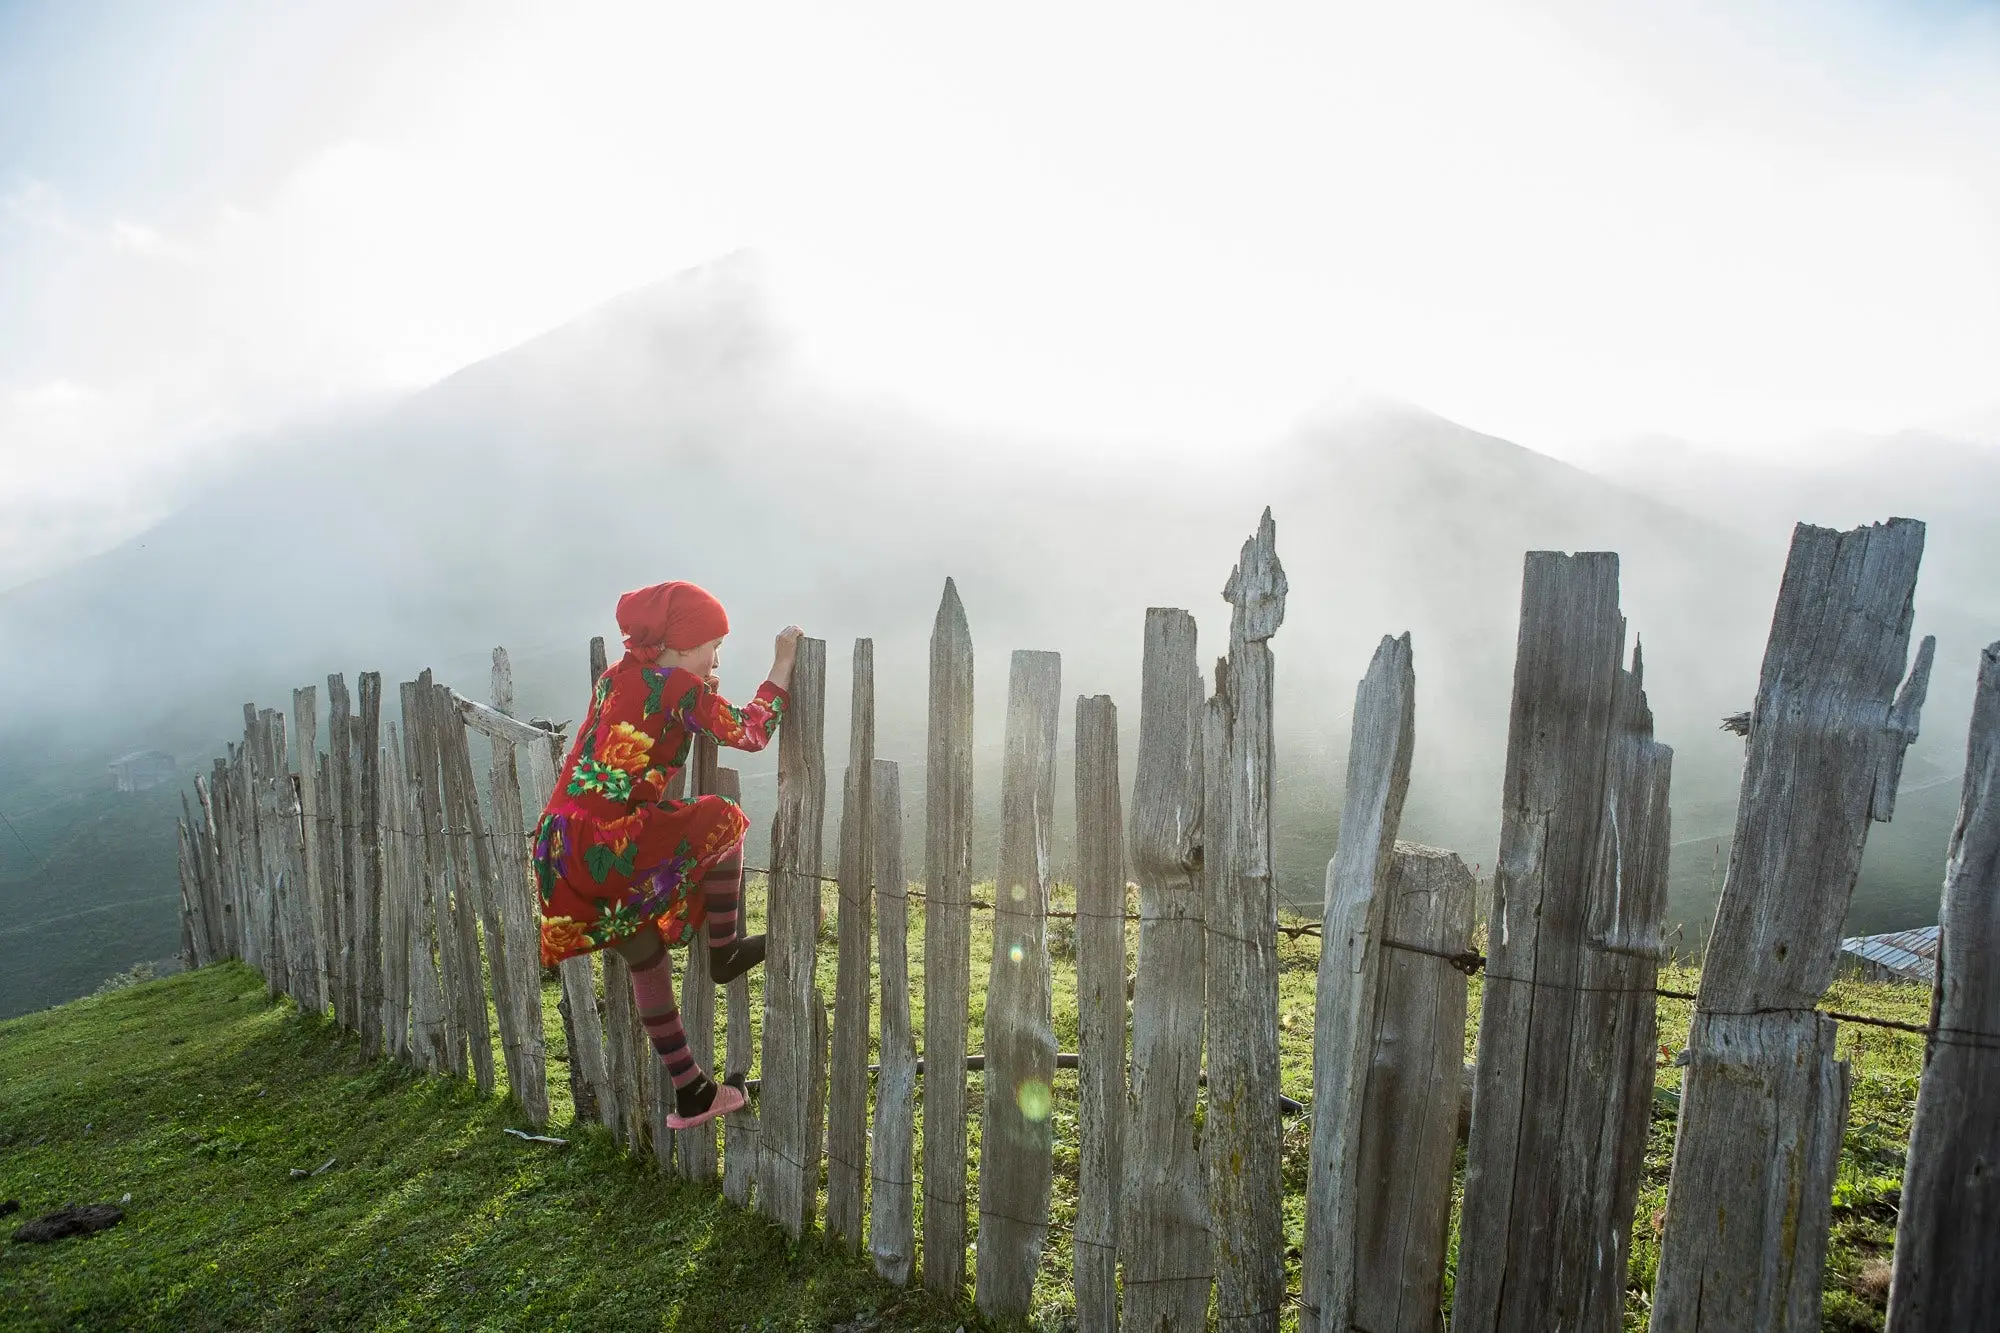 Person climbing a wooden fence surrounded by misty clouds. 